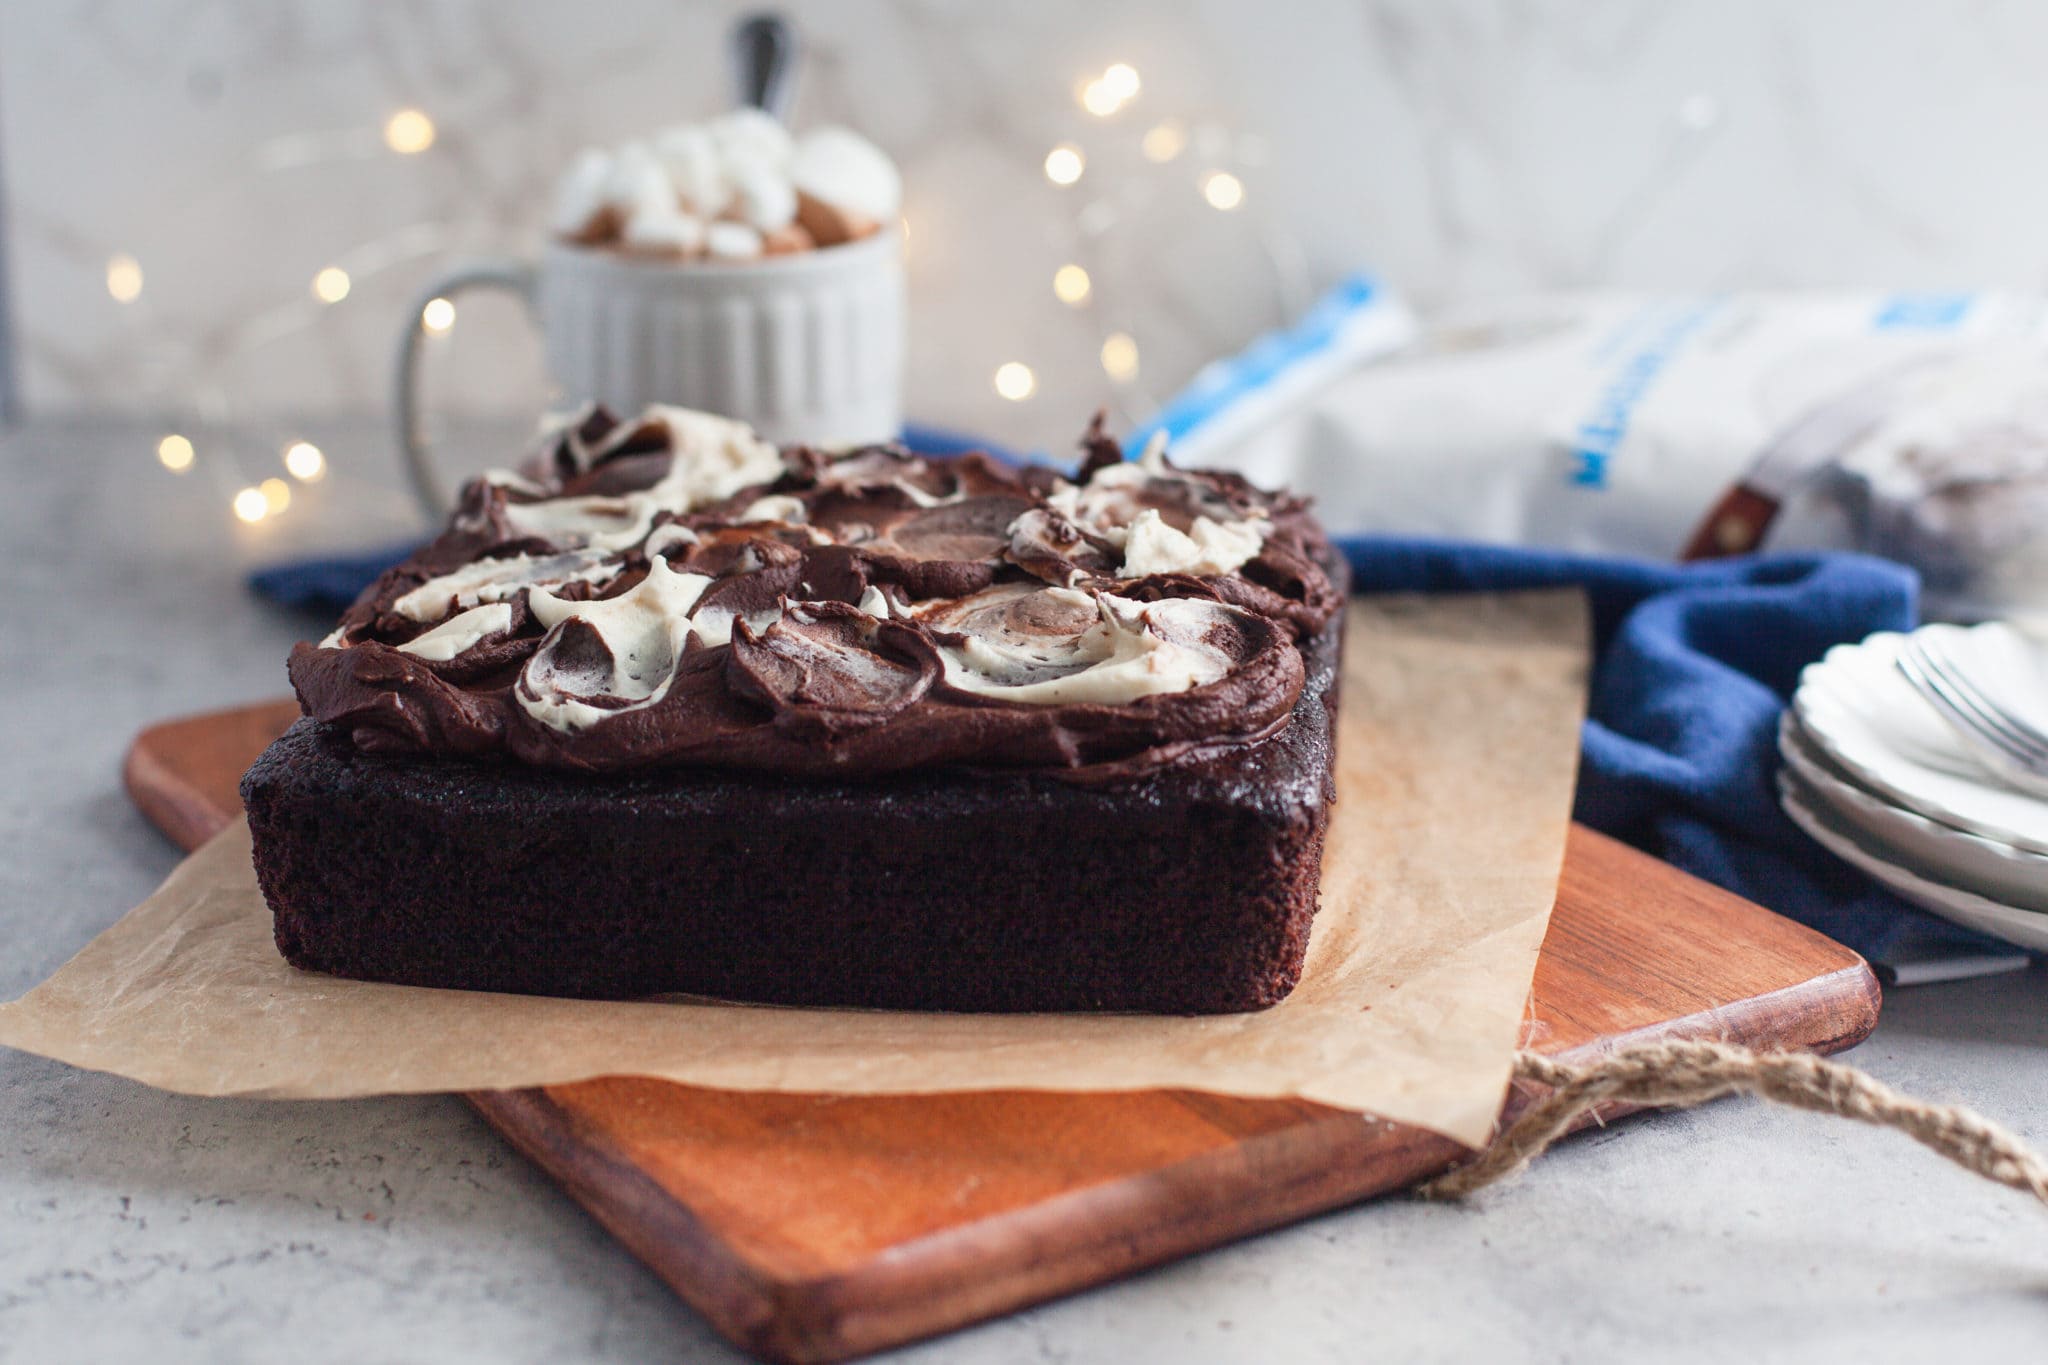 A decadent chocolate cake made with King Arthur Gluten Free Measure for Measure Flour, filled with Toasted Marshmallow Cream and topped with a delectable Hot Chocolate Frosting.